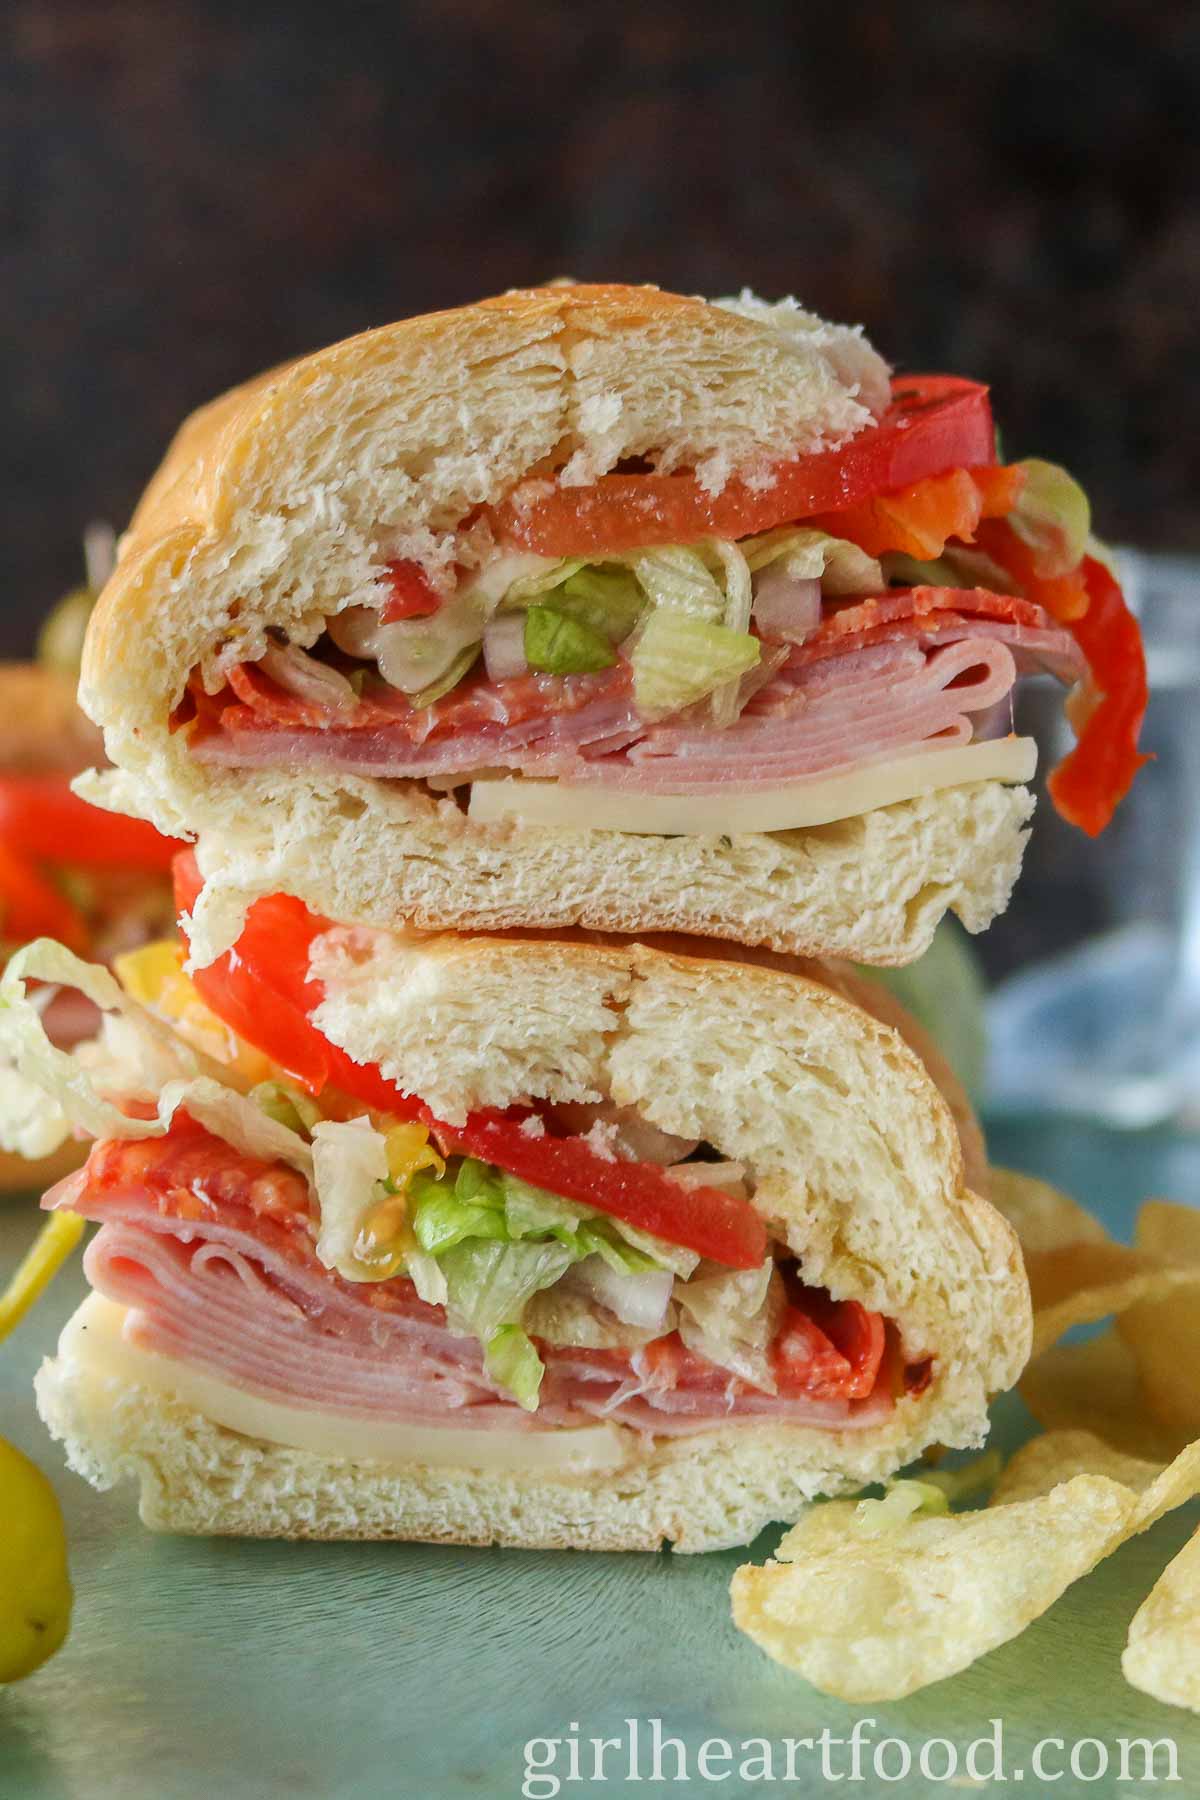 Stack of two halves of an Italian cold cut sandwich.